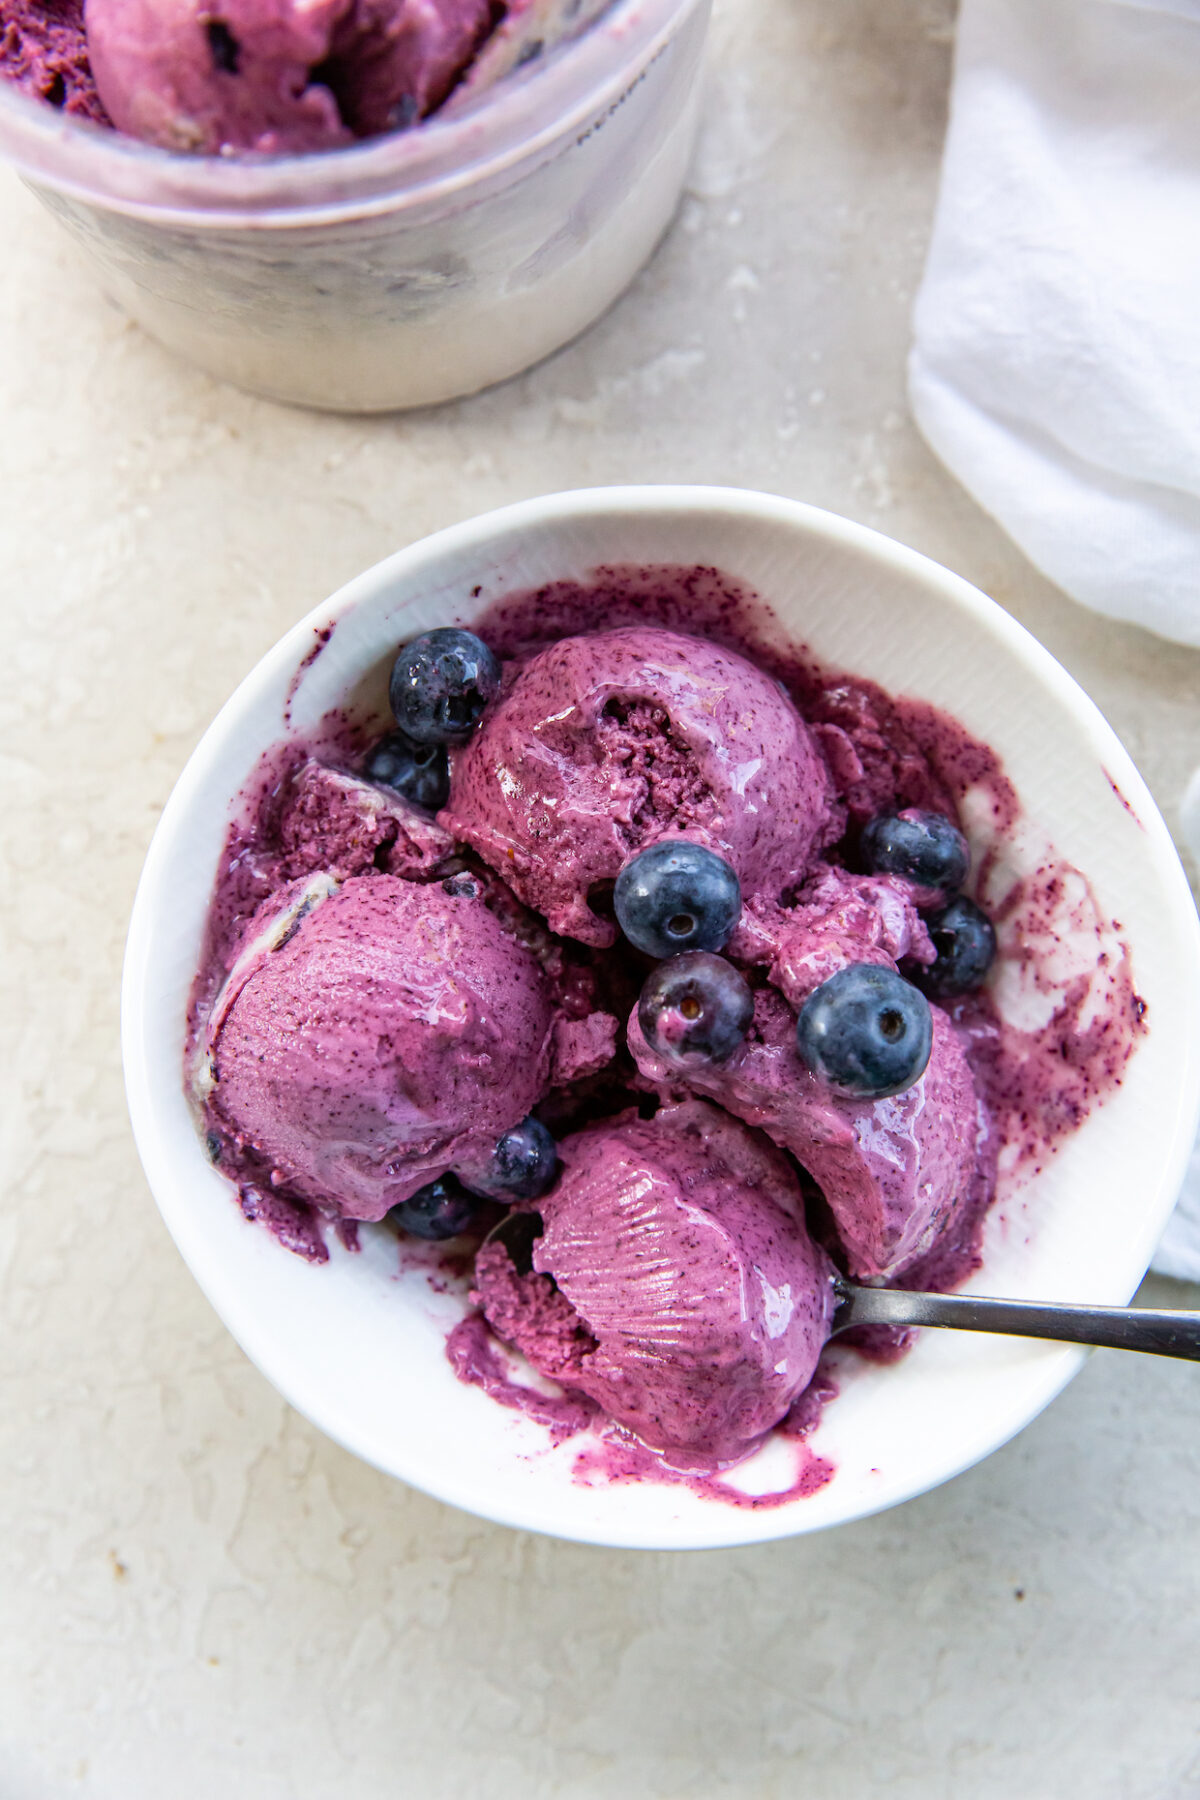 Ninja Creami Blueberry ice cream in a Bowl with a Spoon topped with blueberries